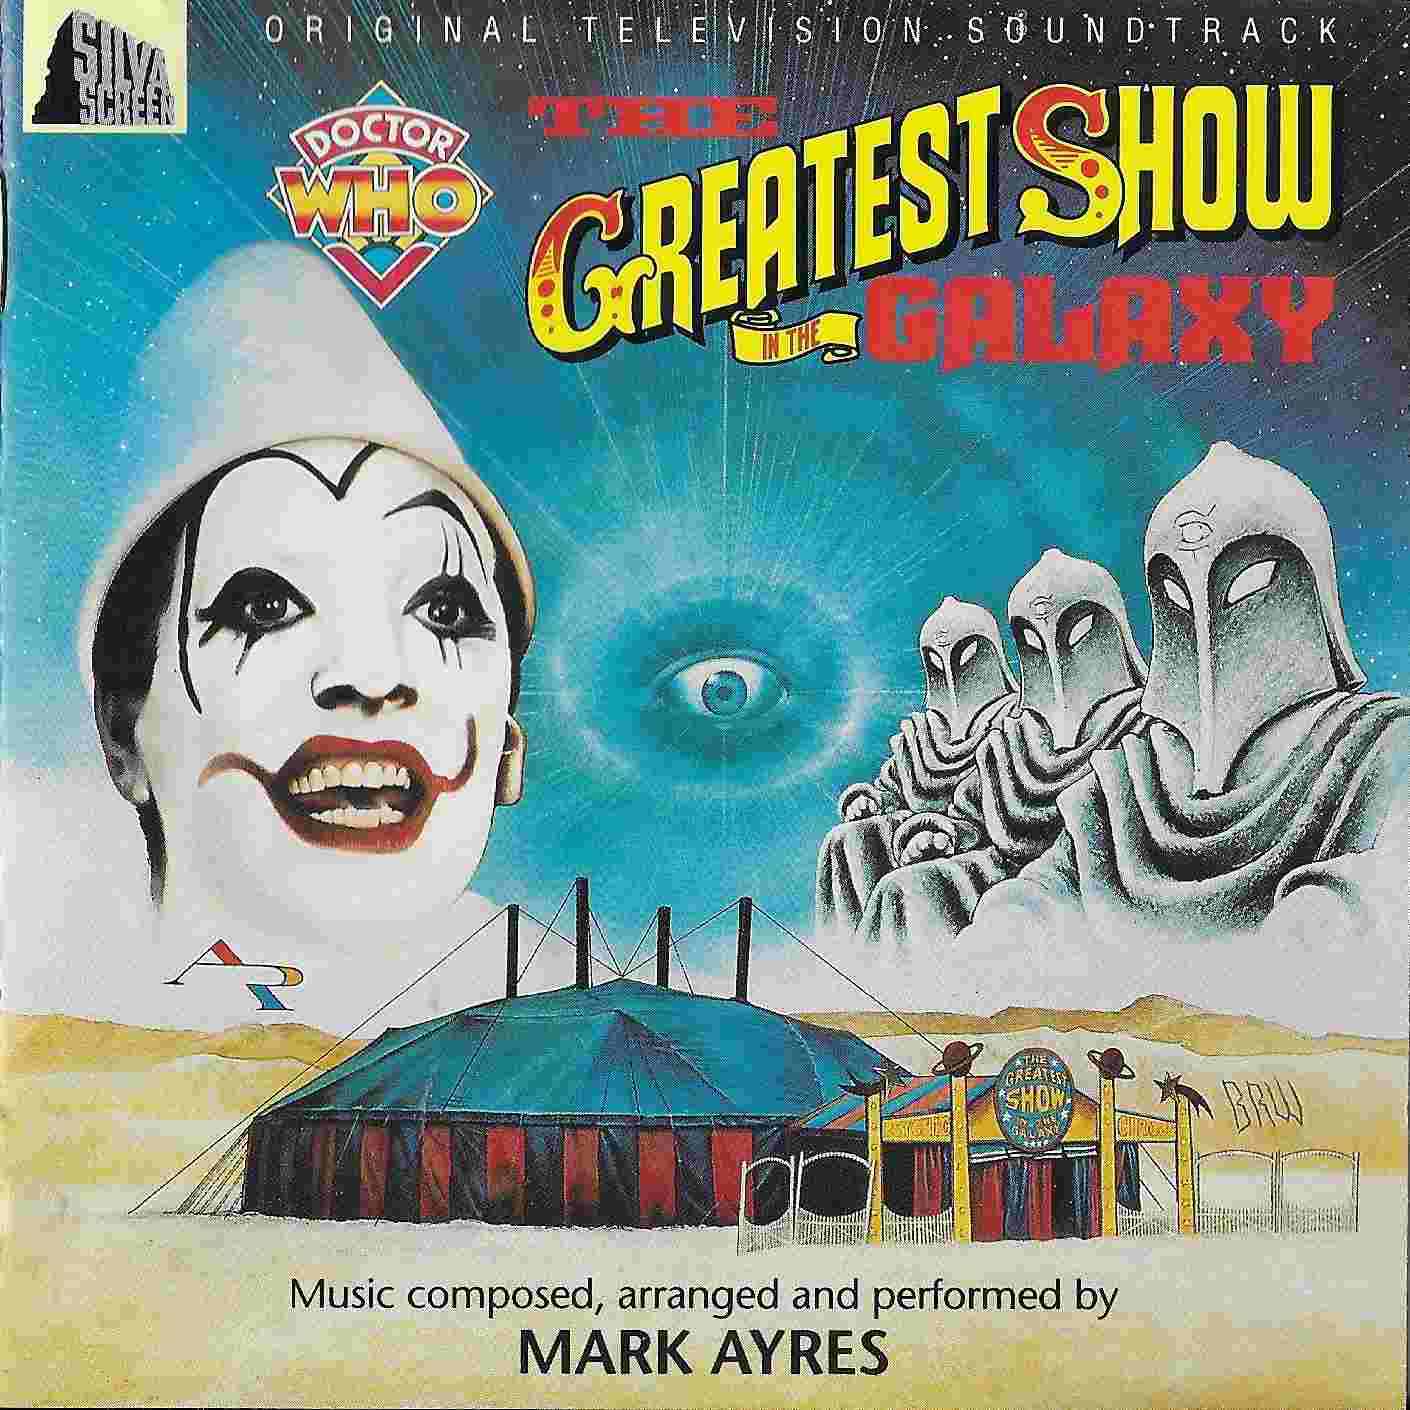 Picture of FILMCD 114 Doctor who - The greatest show in the galaxy by artist Mark Ayres from the BBC records and Tapes library